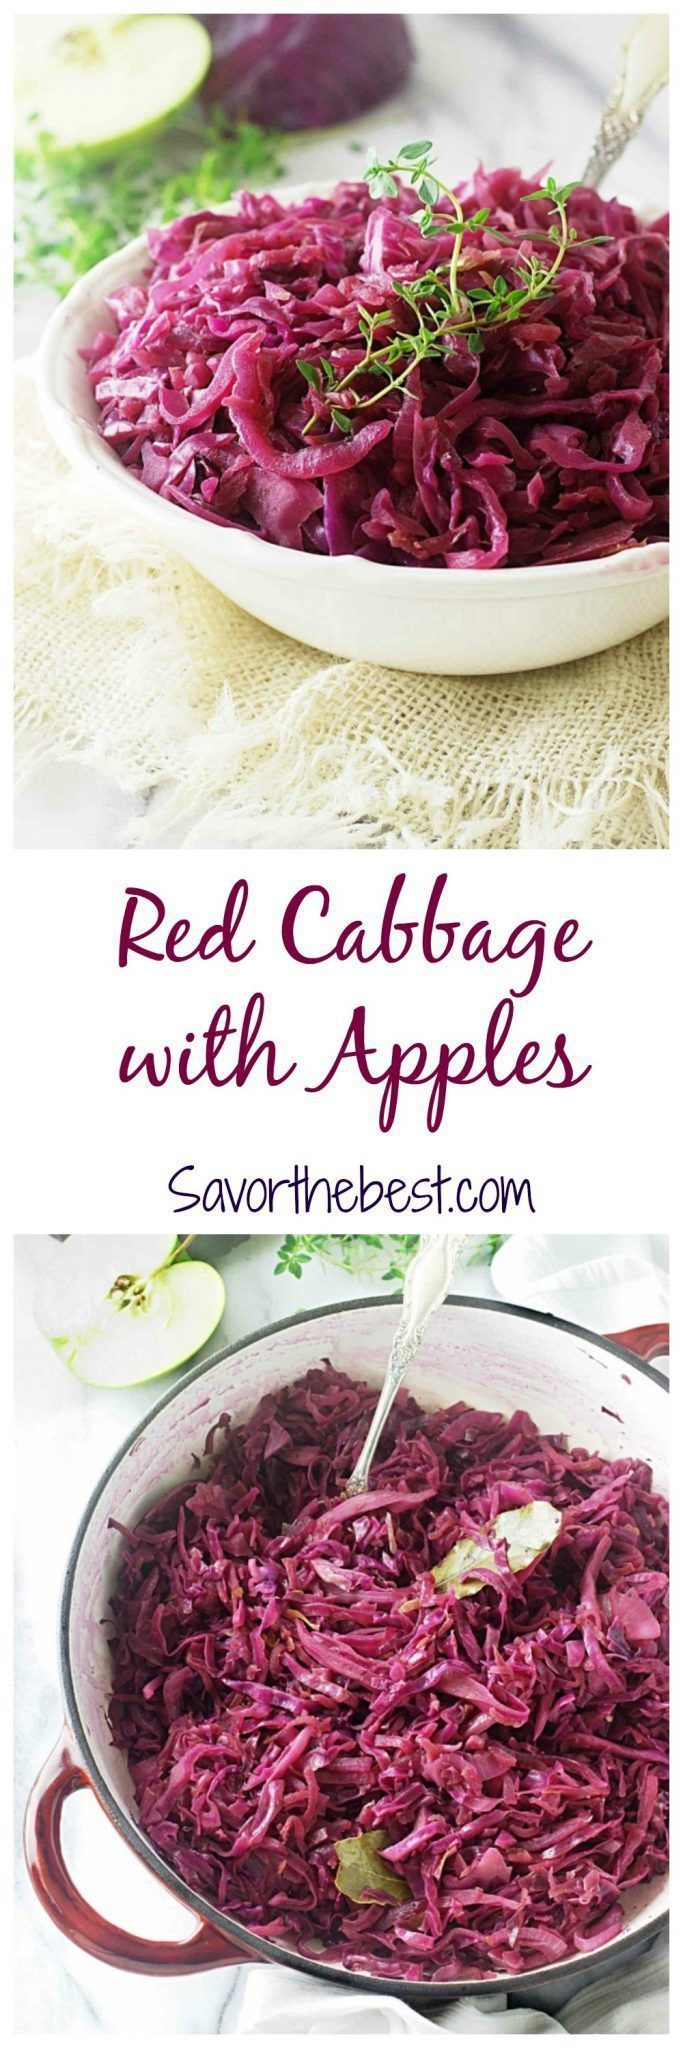 Red Cabbage with Apples (Rotkohl mit Apfeln) -   21 german cabbage recipes
 ideas